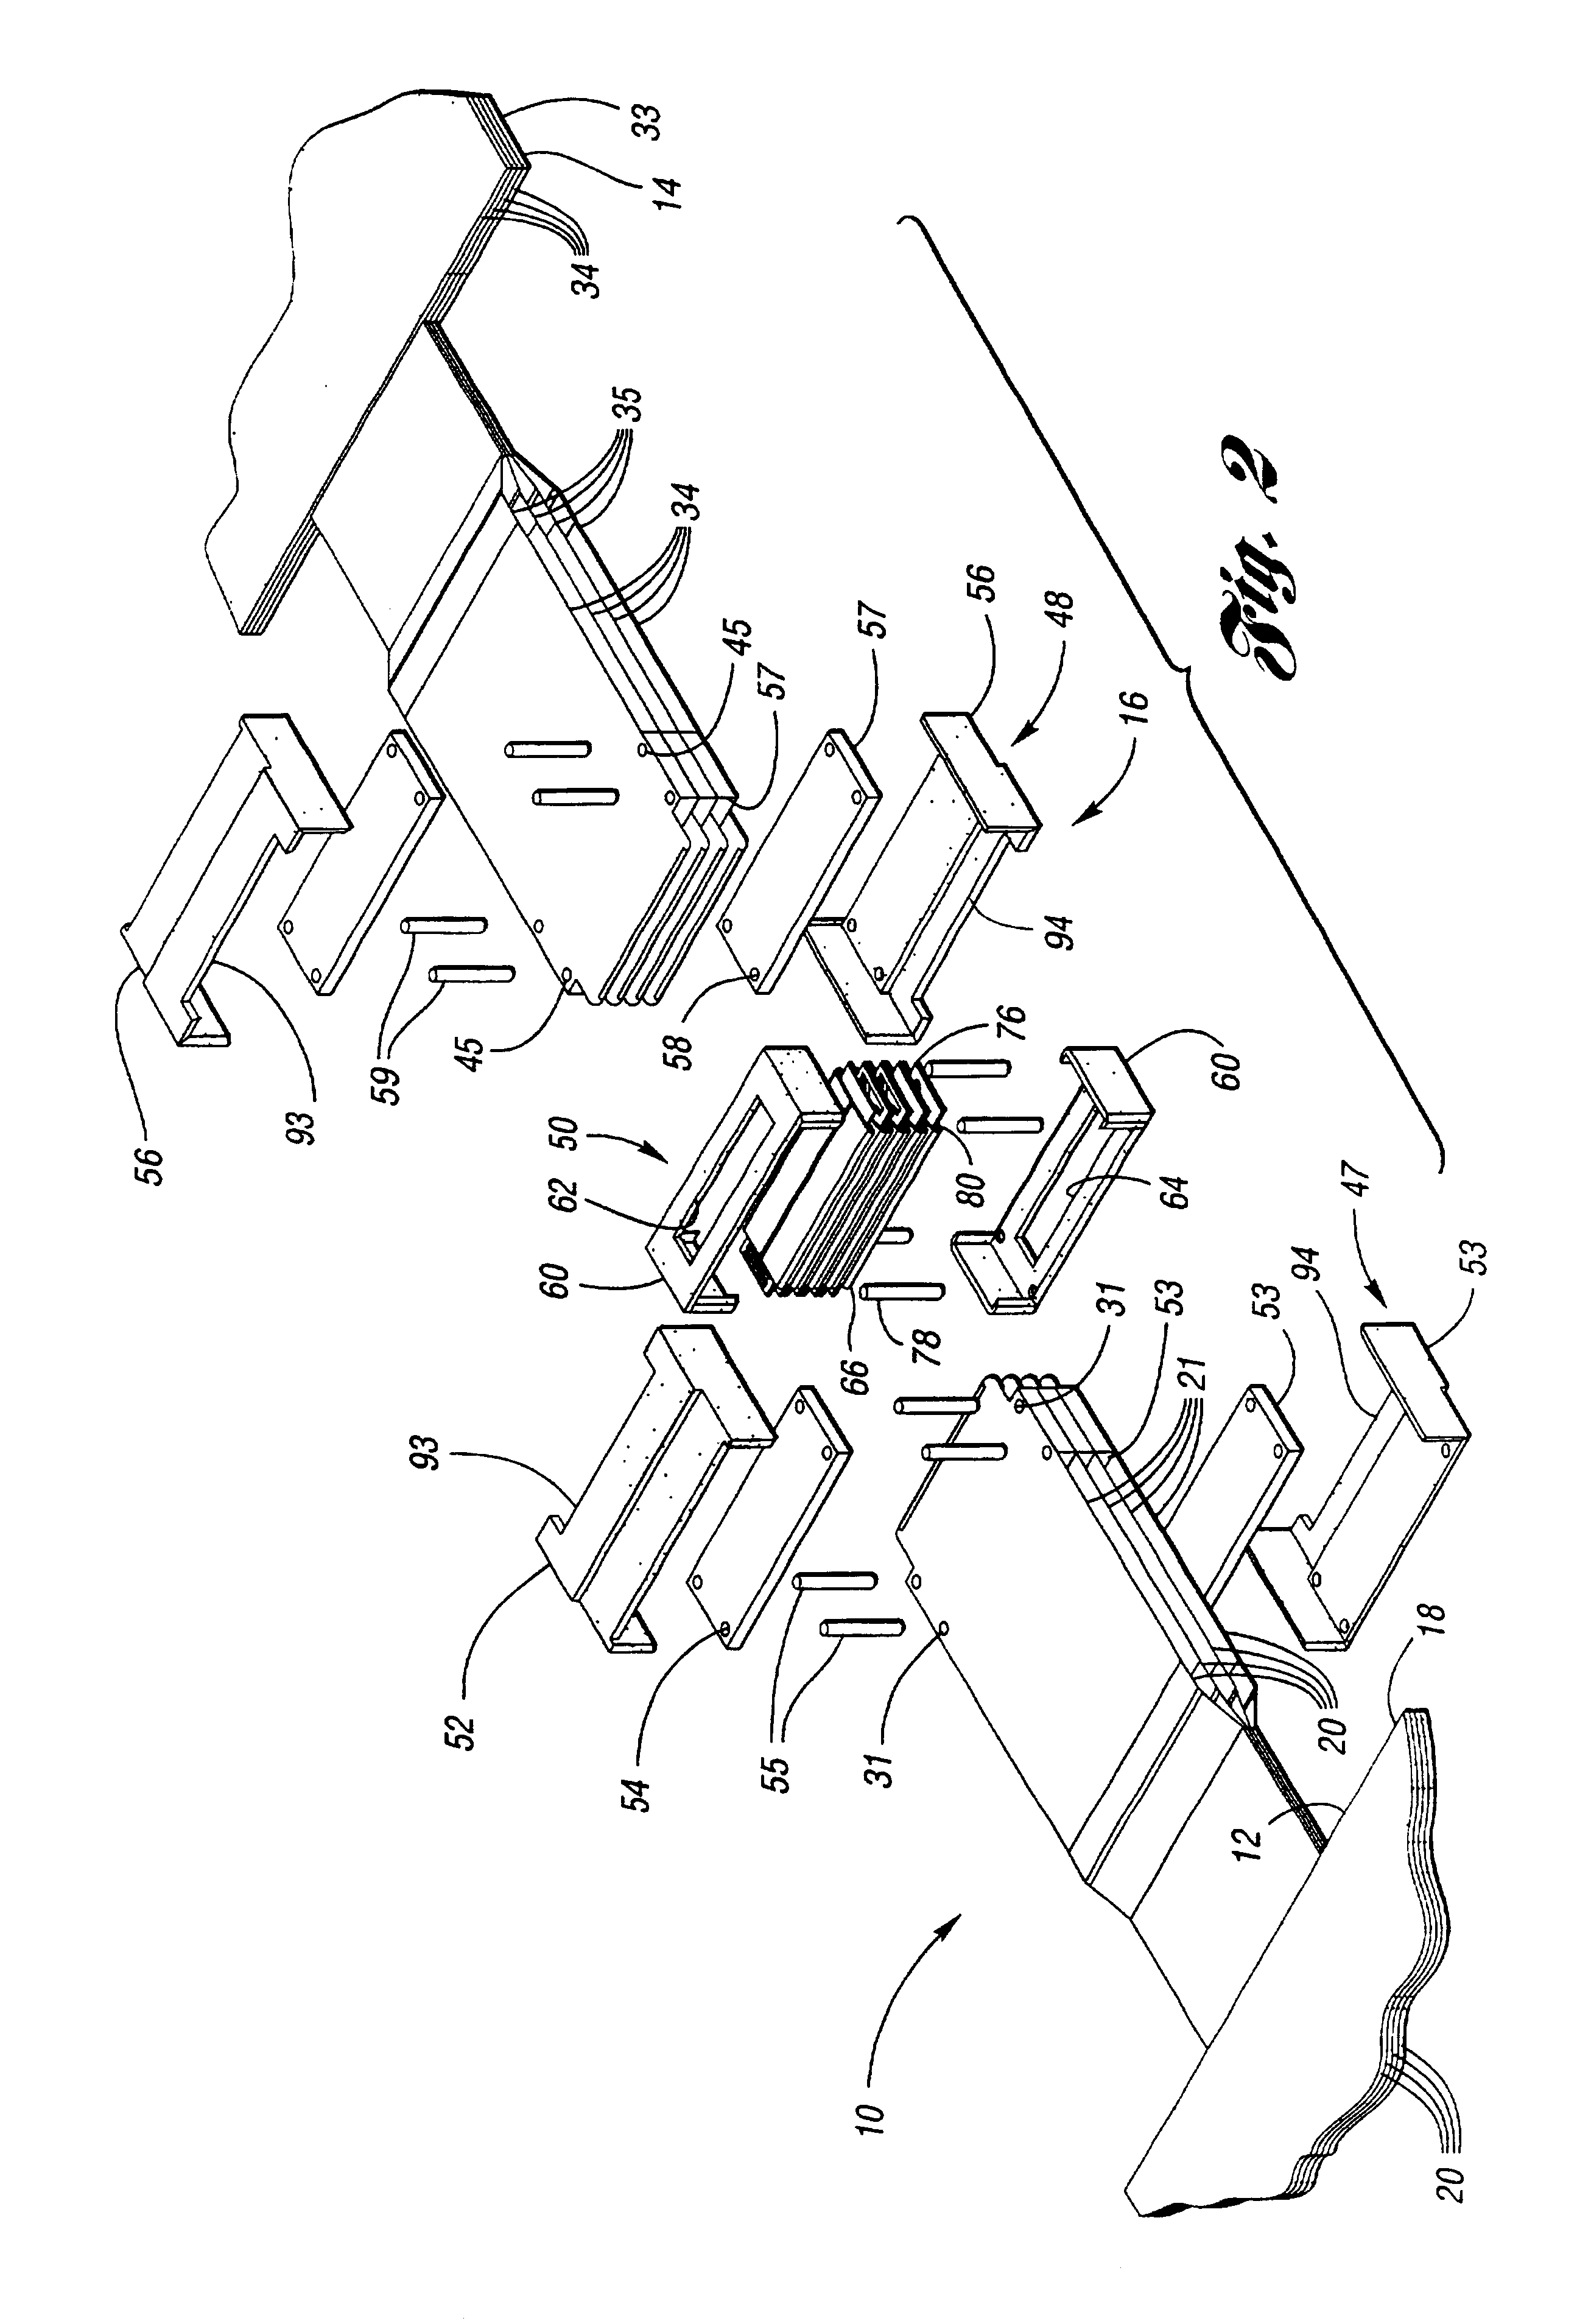 Method of forming alignment features for conductive devices